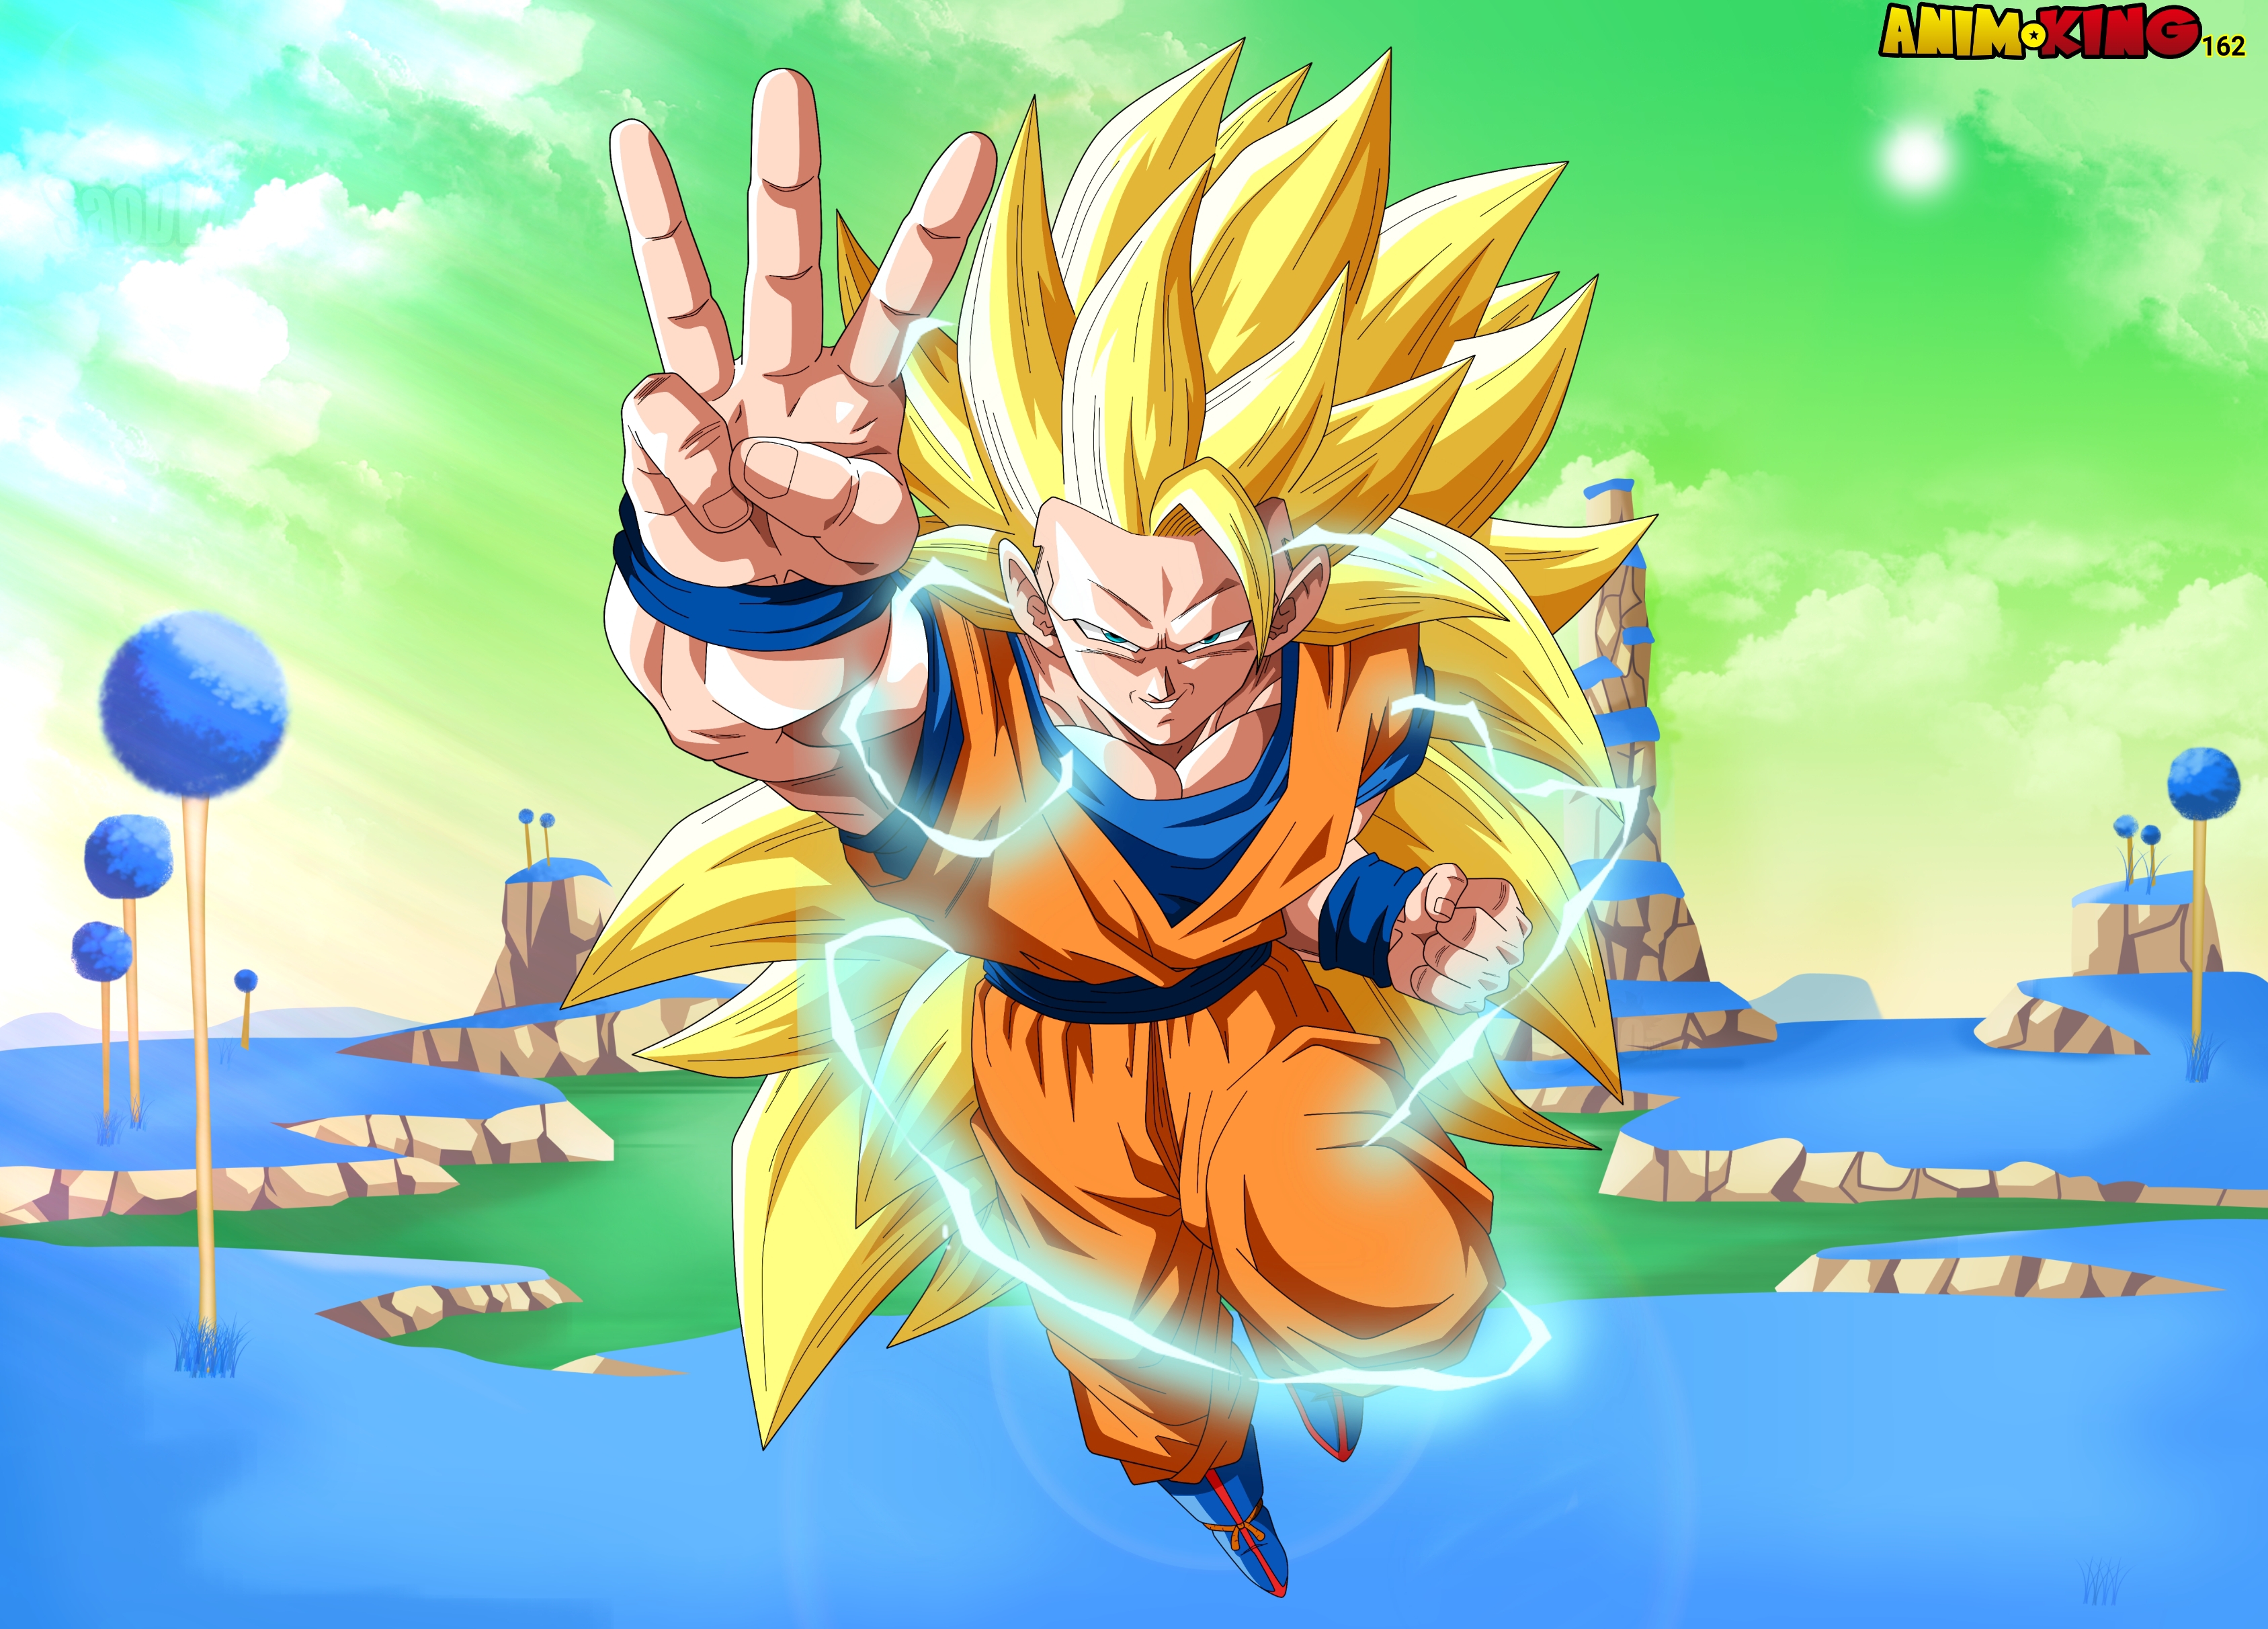 Goku Ssj3 By Animking162 and Png by SaoDVD by Animking162 on DeviantArt